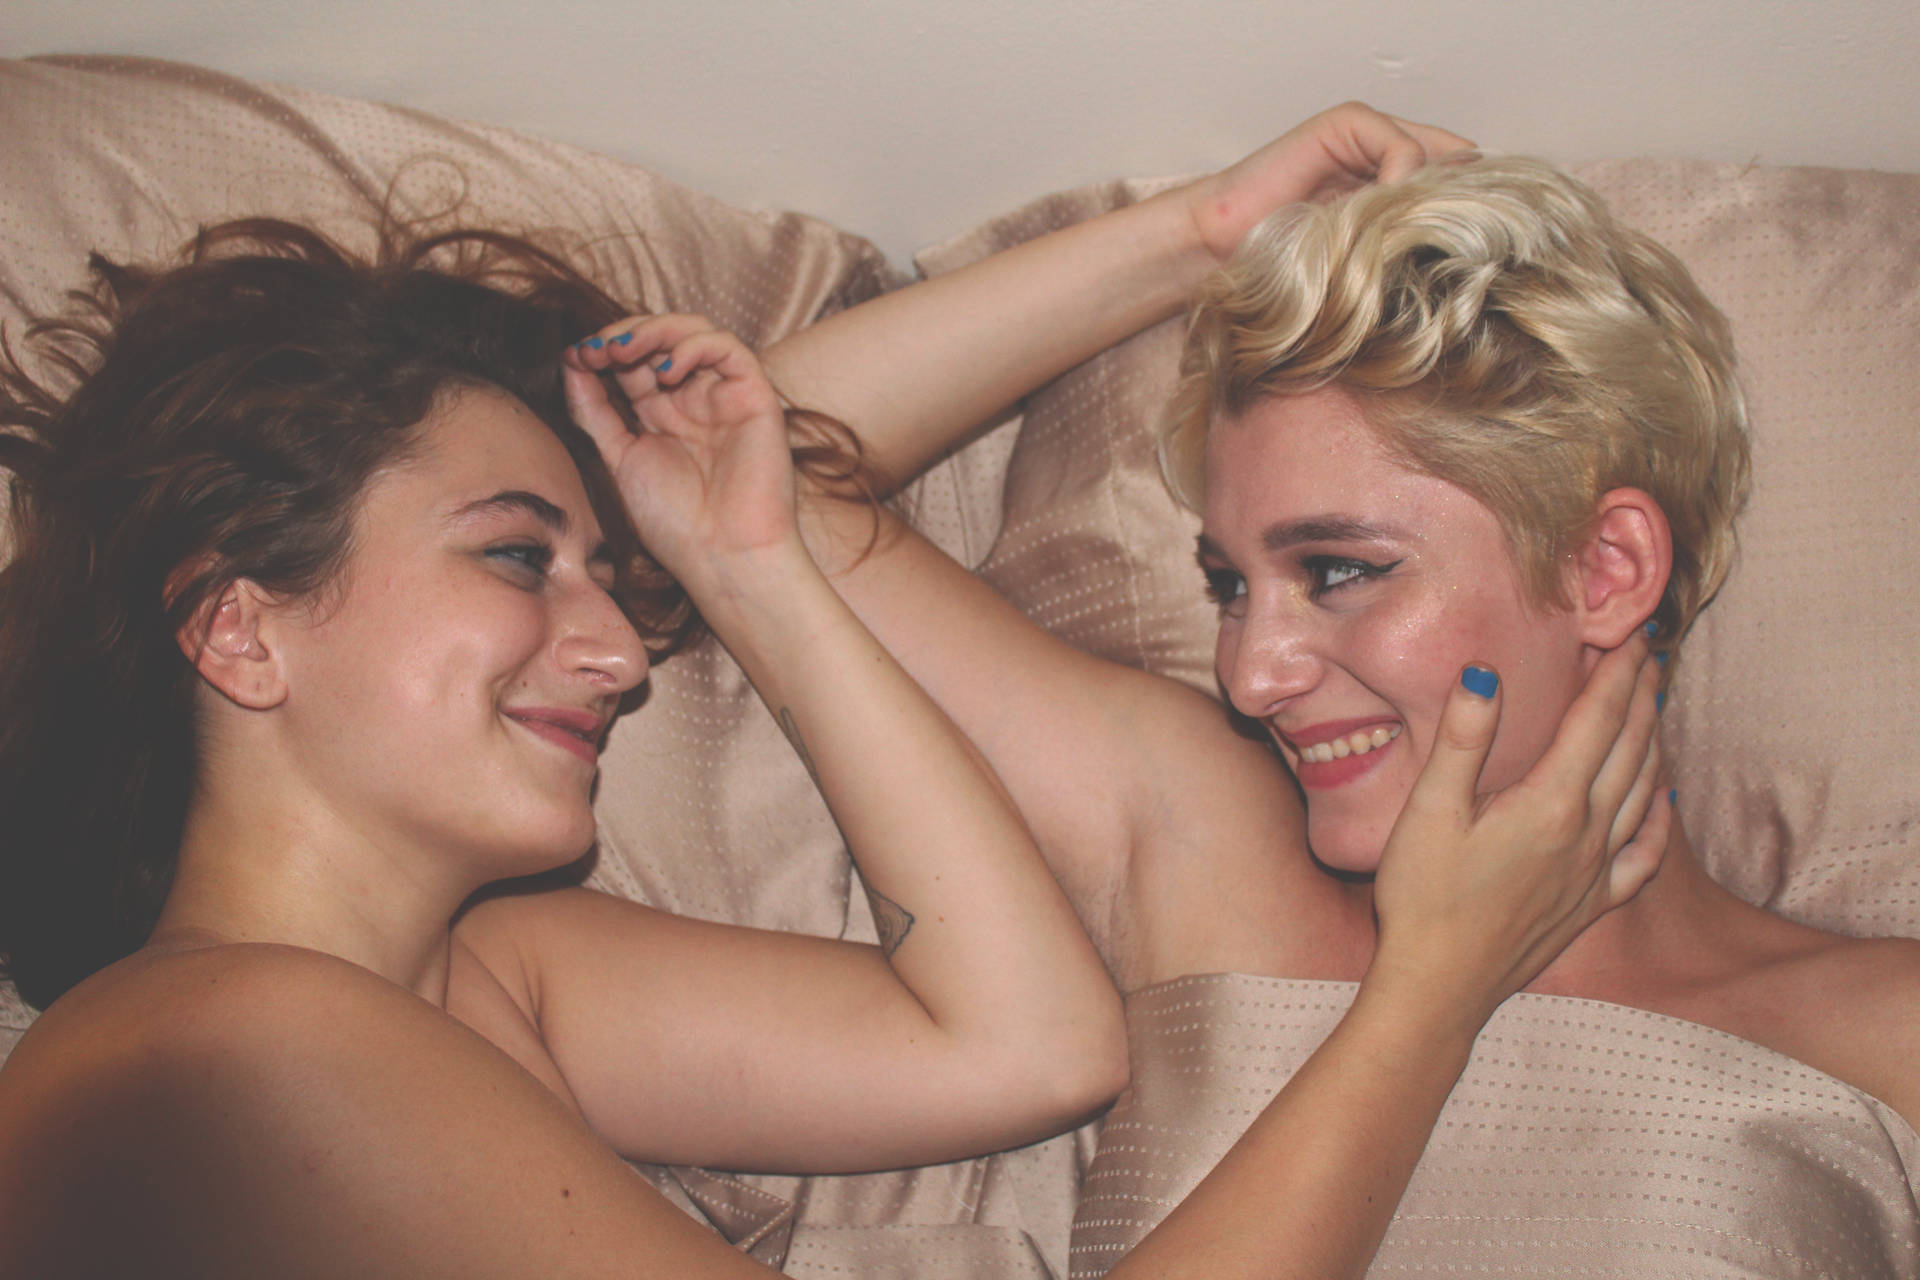 Lesbian Couple On Bed